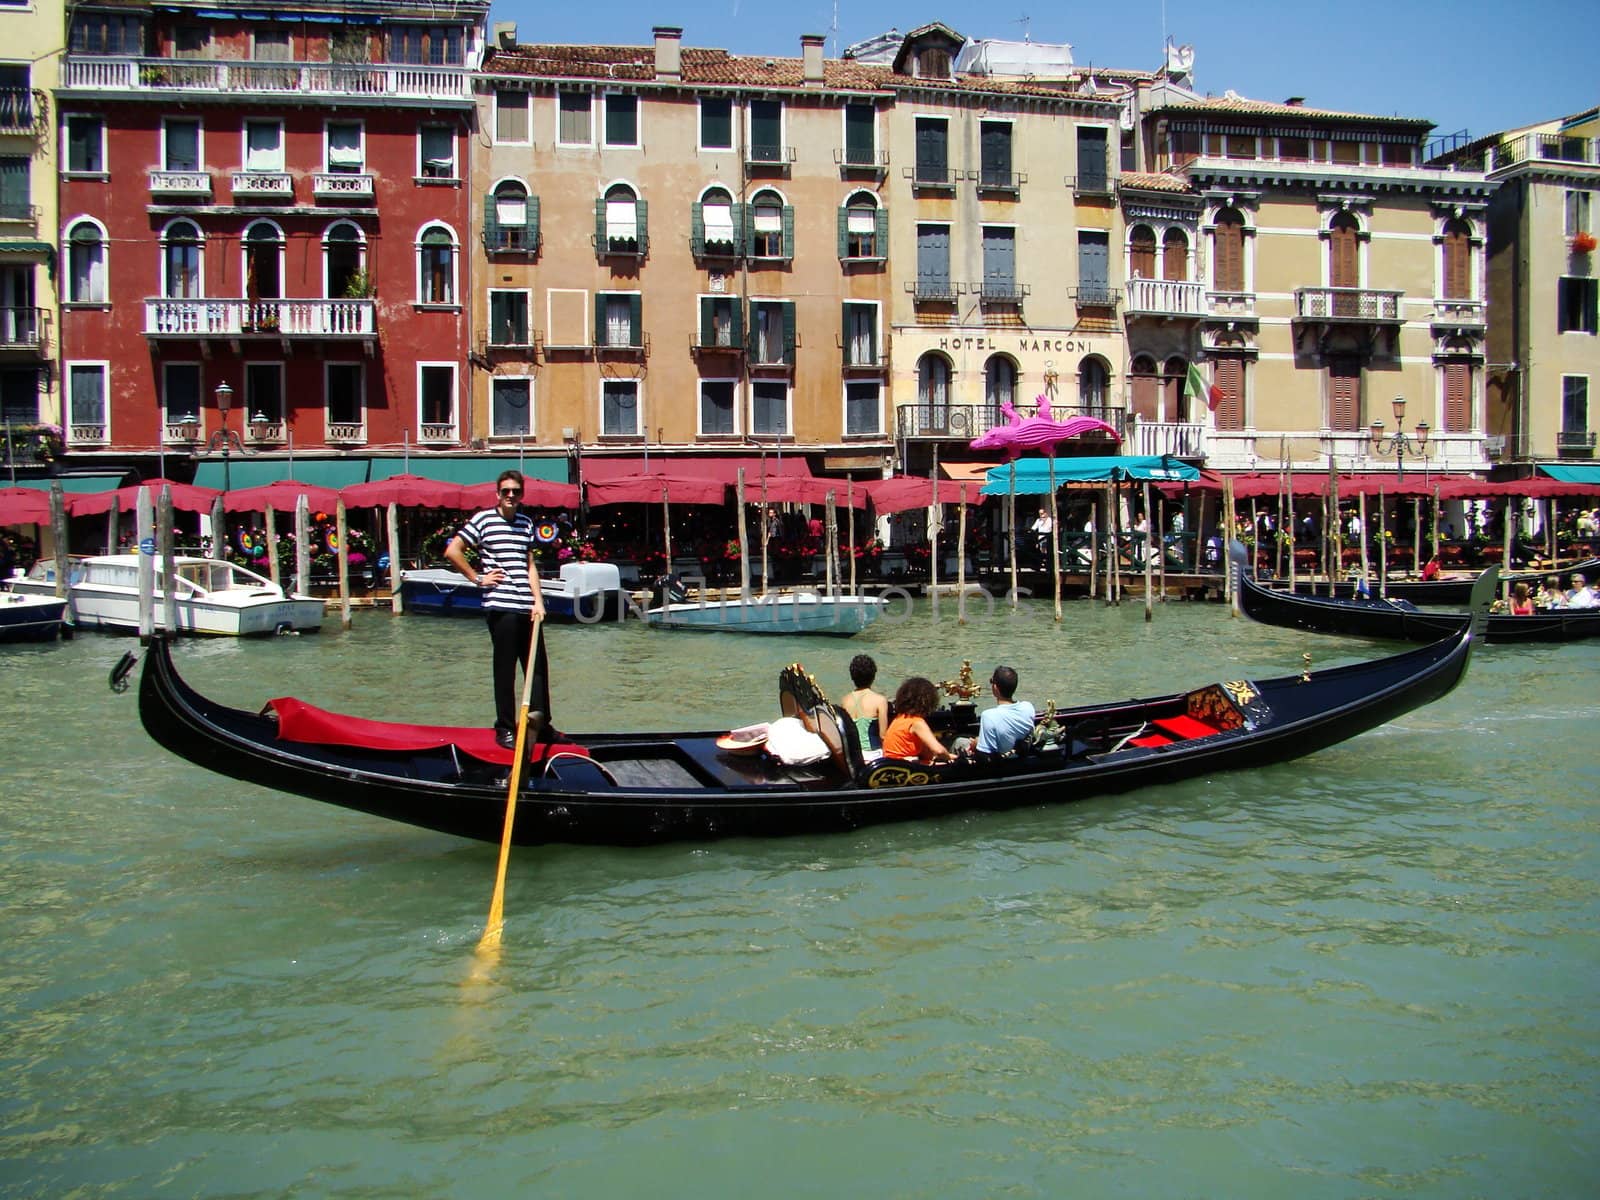 	
gondoliere on Canale Grande in Venice, Italy.